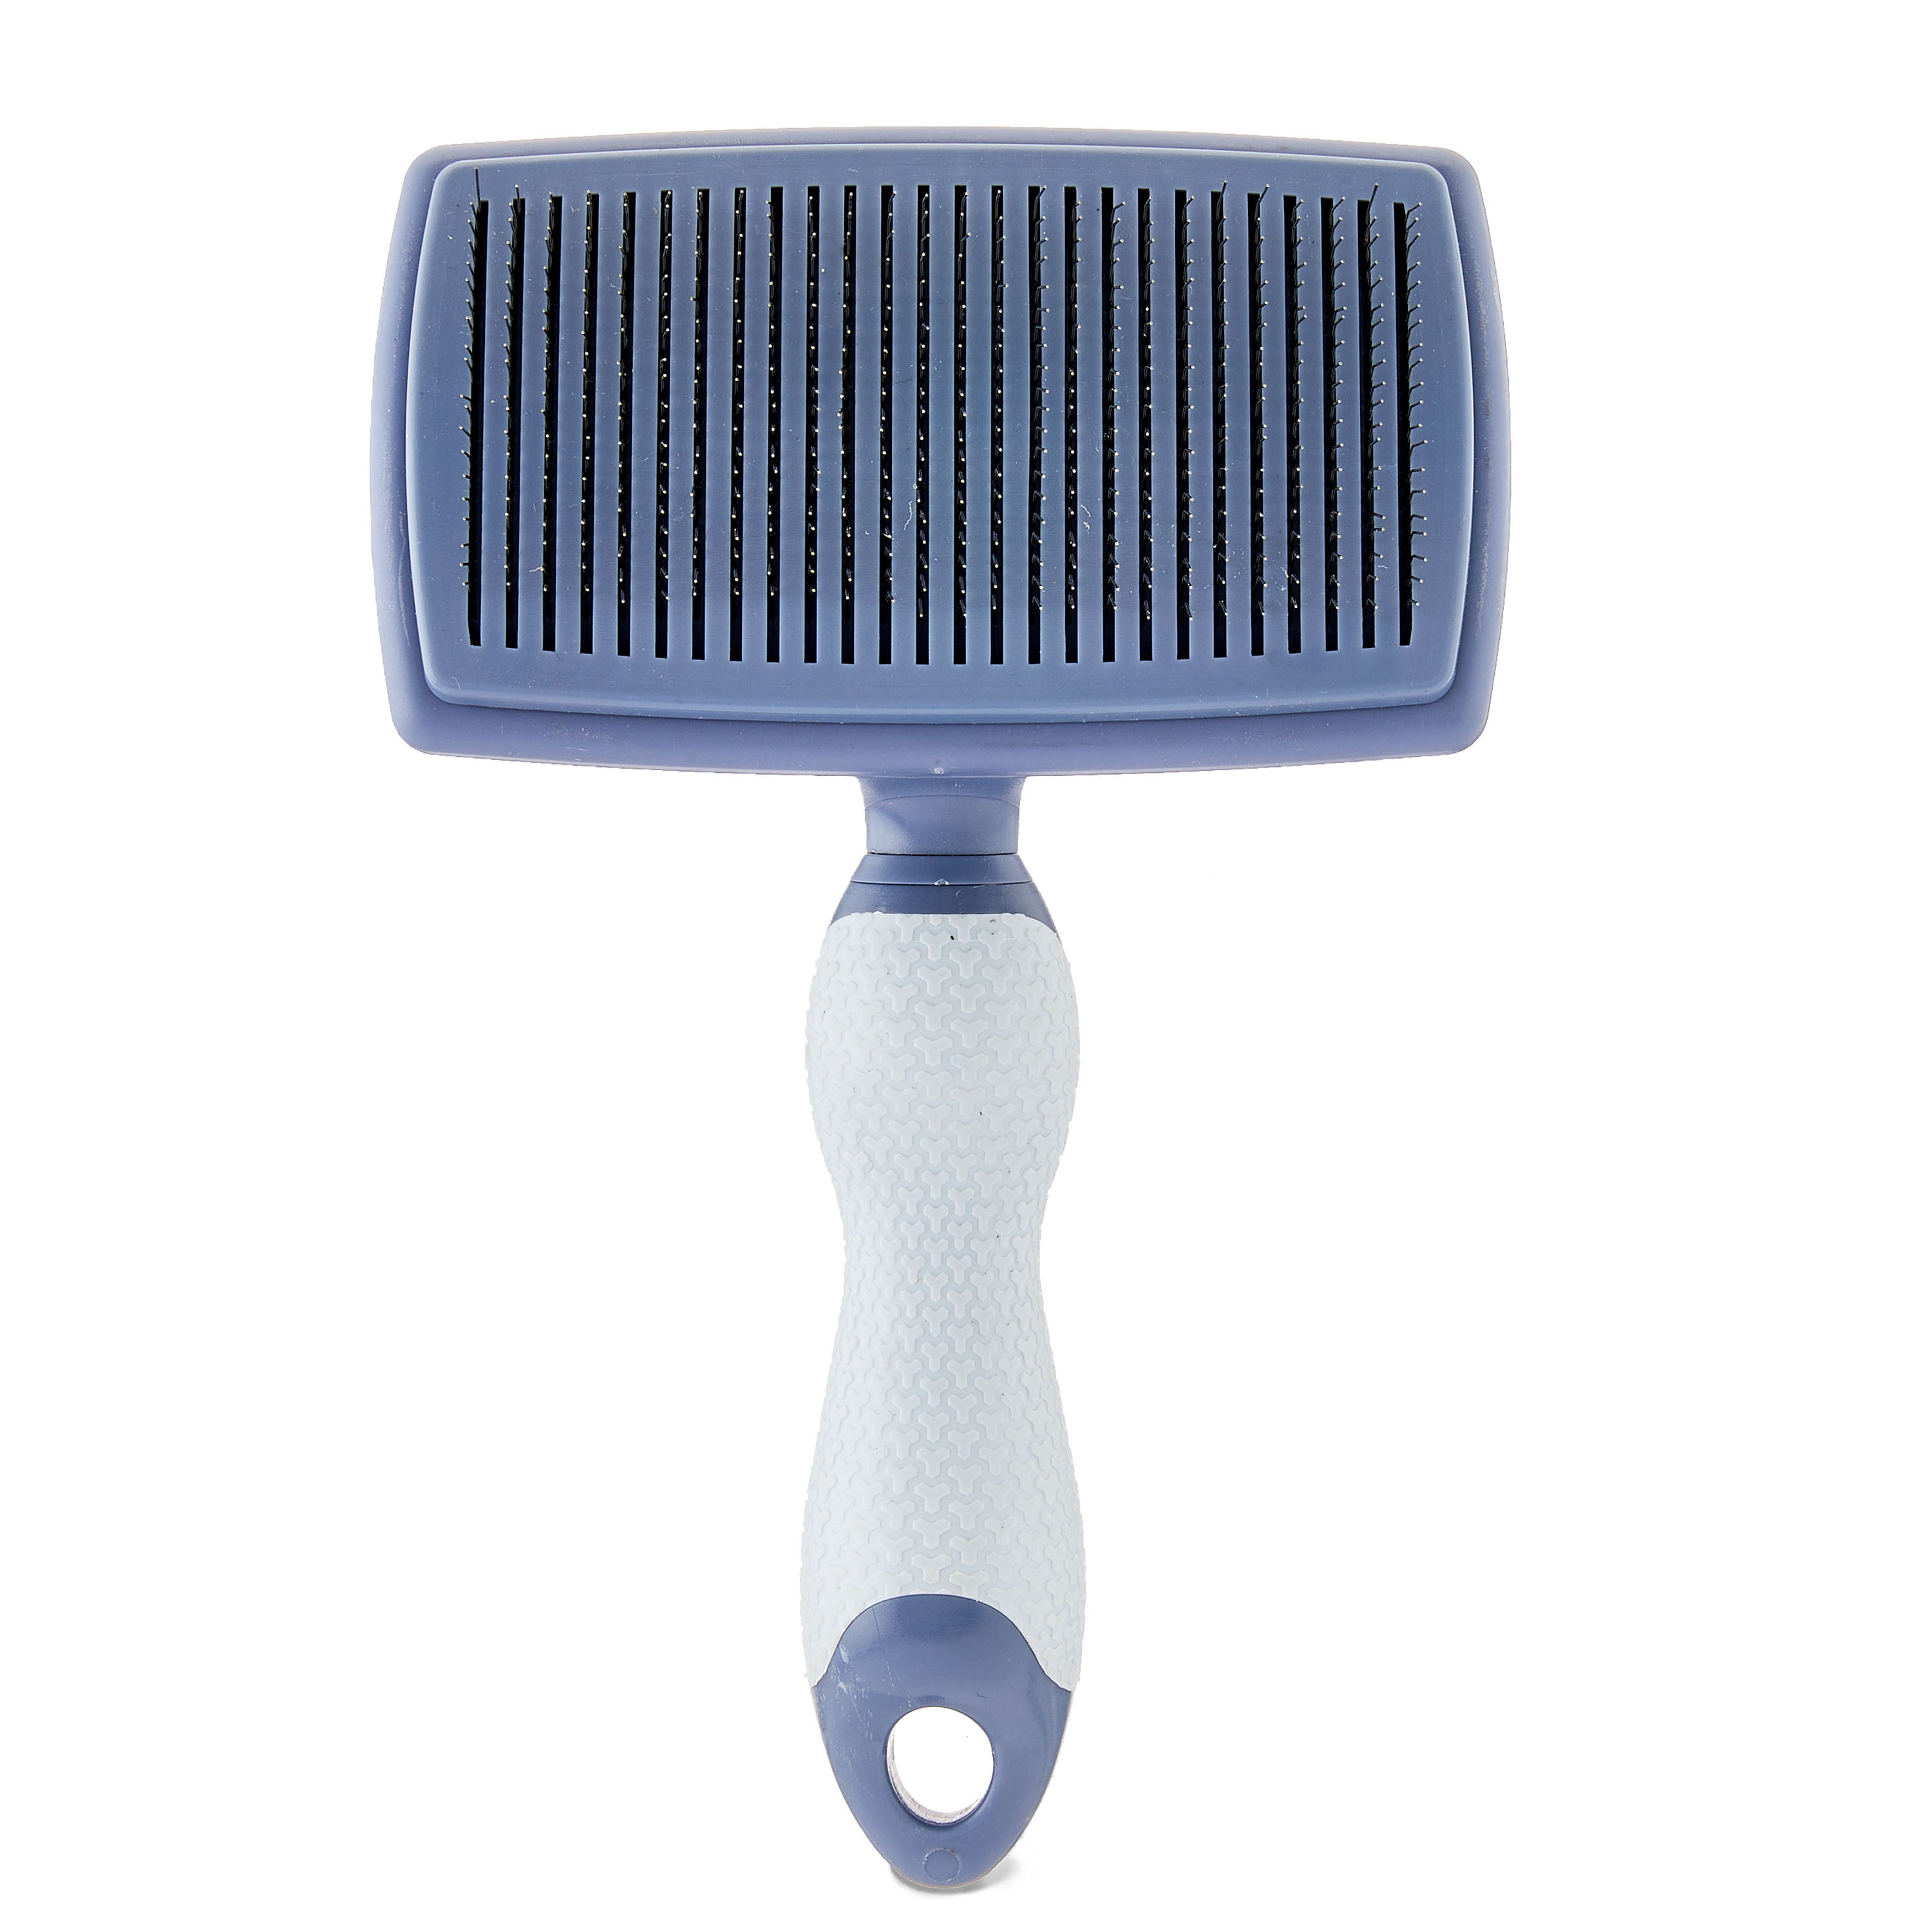 Freshly Bailey Self Cleaning Slicker Brush for Dogs and Cats - Top Slicker Dog and Cat Brush - Effective, Comfortable, and Super